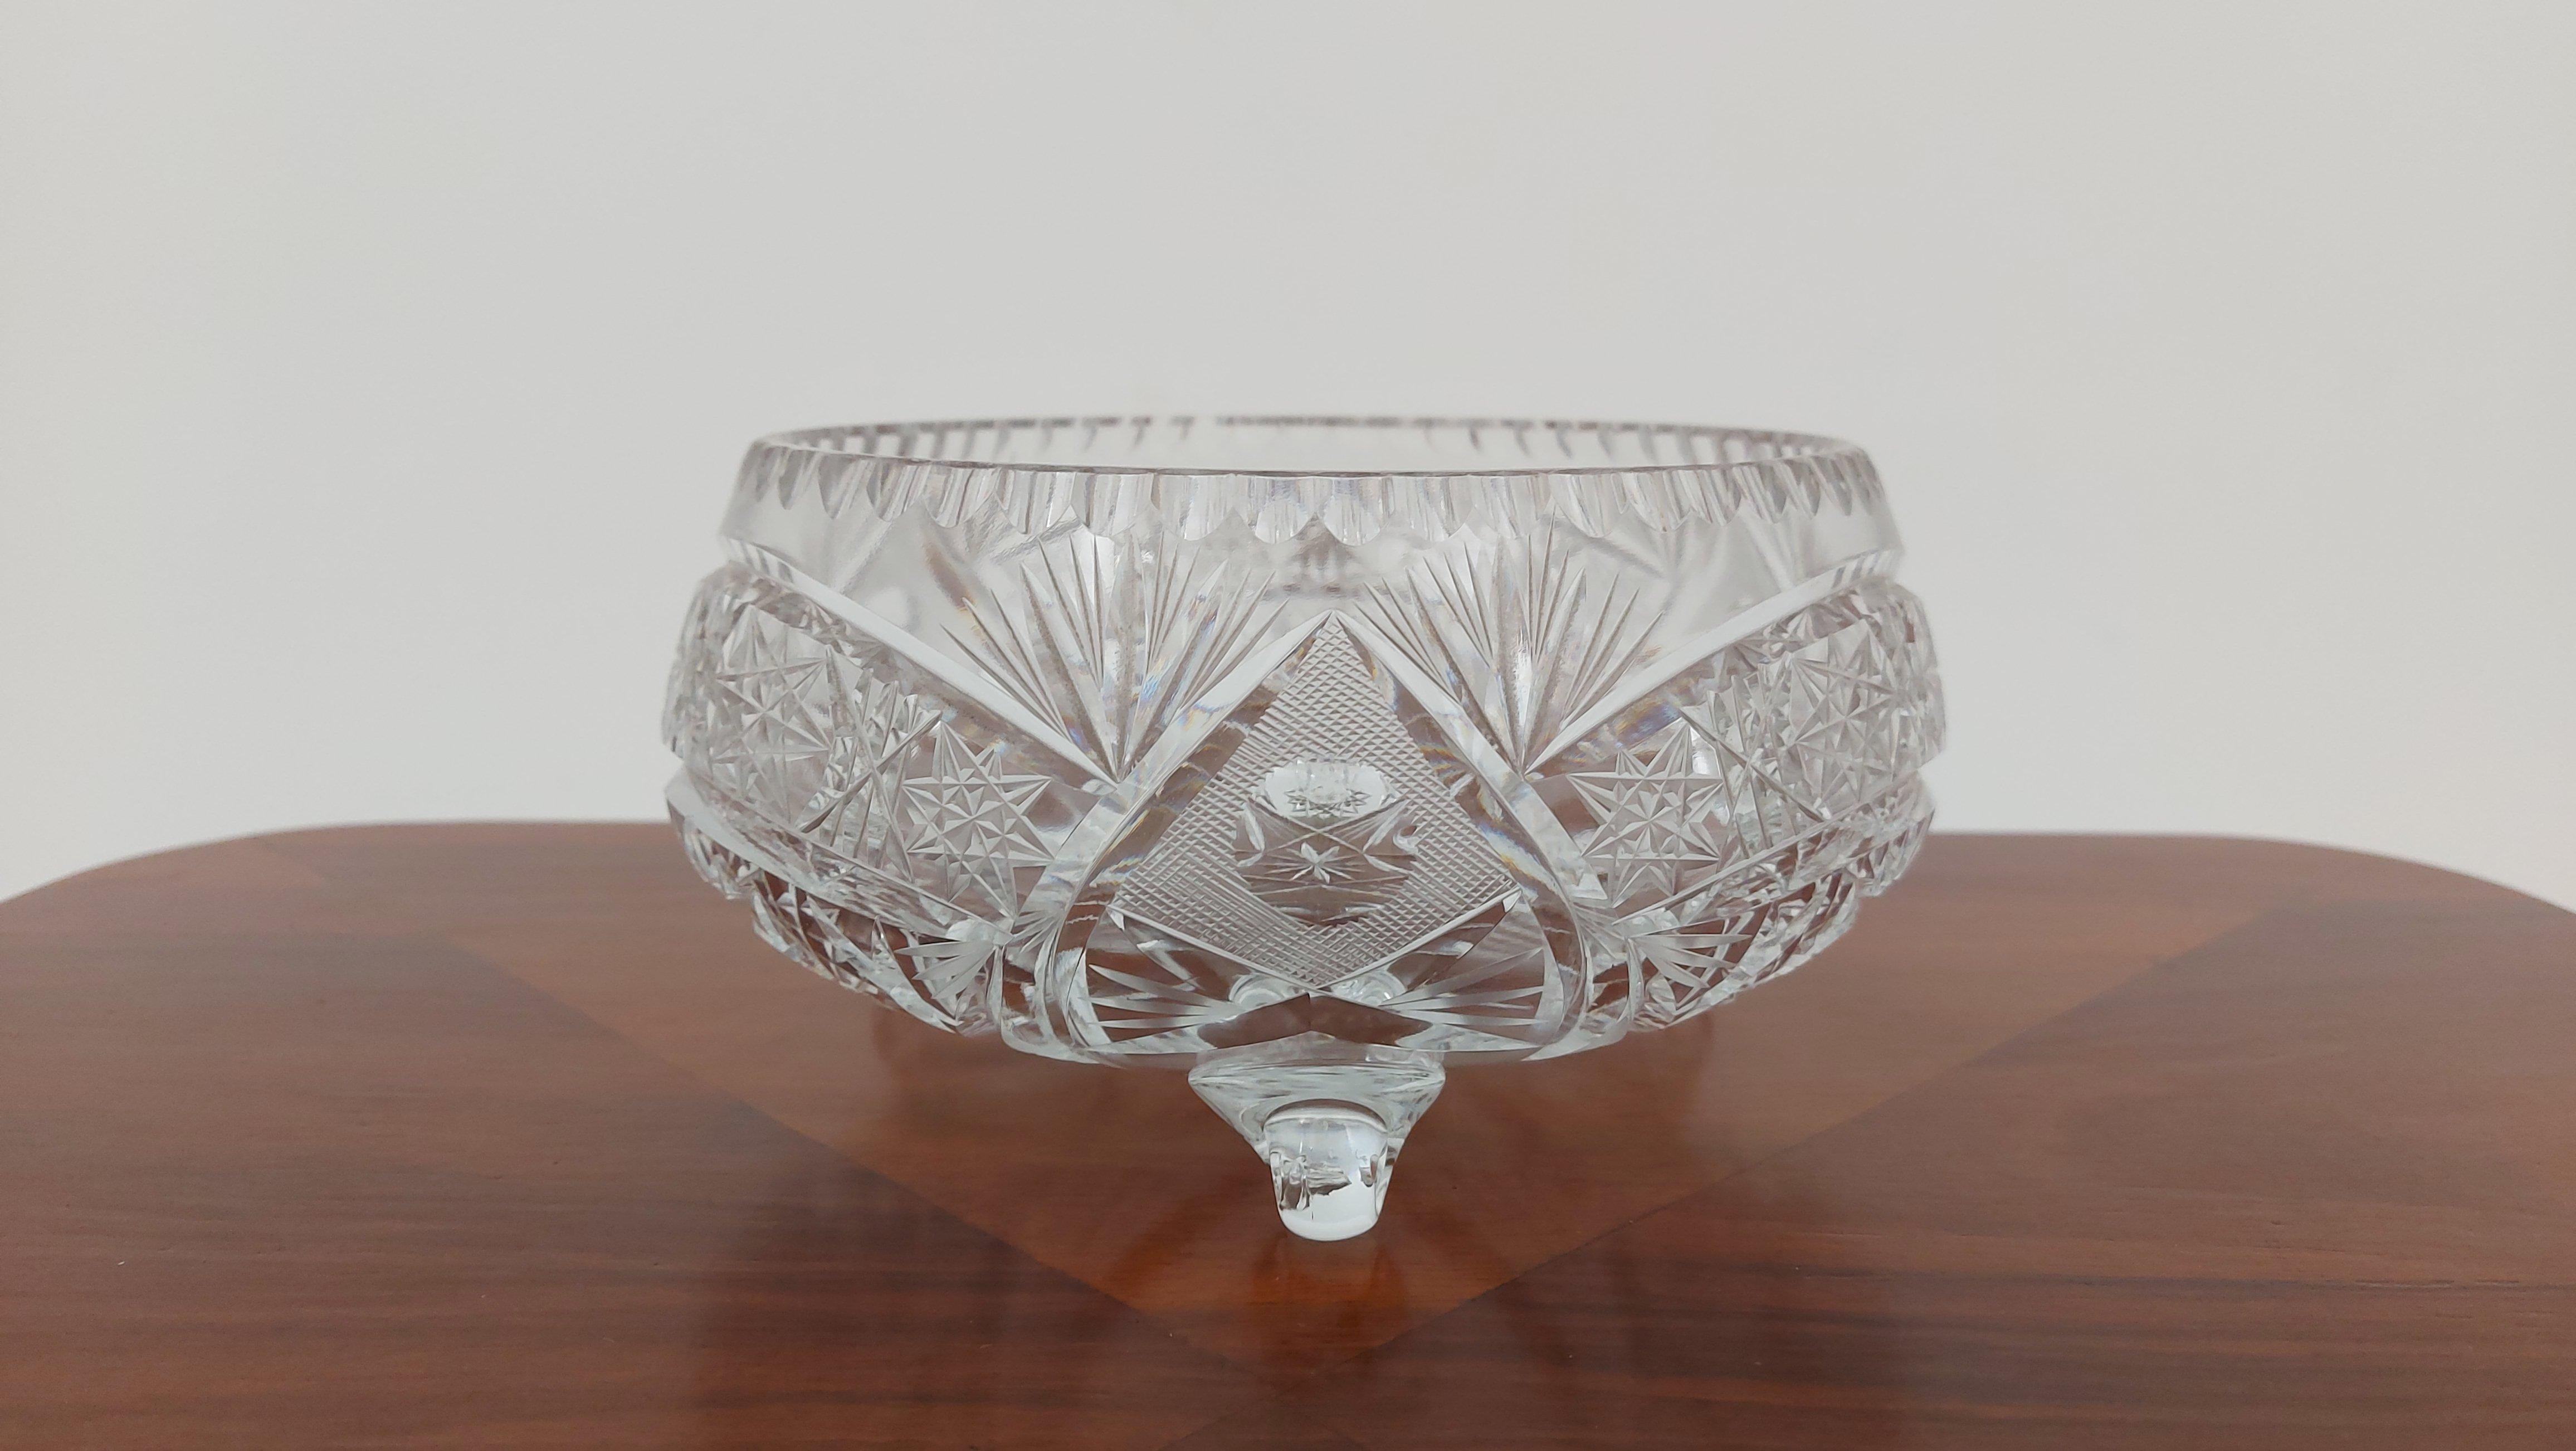 Crystal bowl for fruit or sweets.

Made in Poland in the 1950s / 1960s.

Very good condition.

Dimensions: height 10.5 cm / diameter 21 cm.